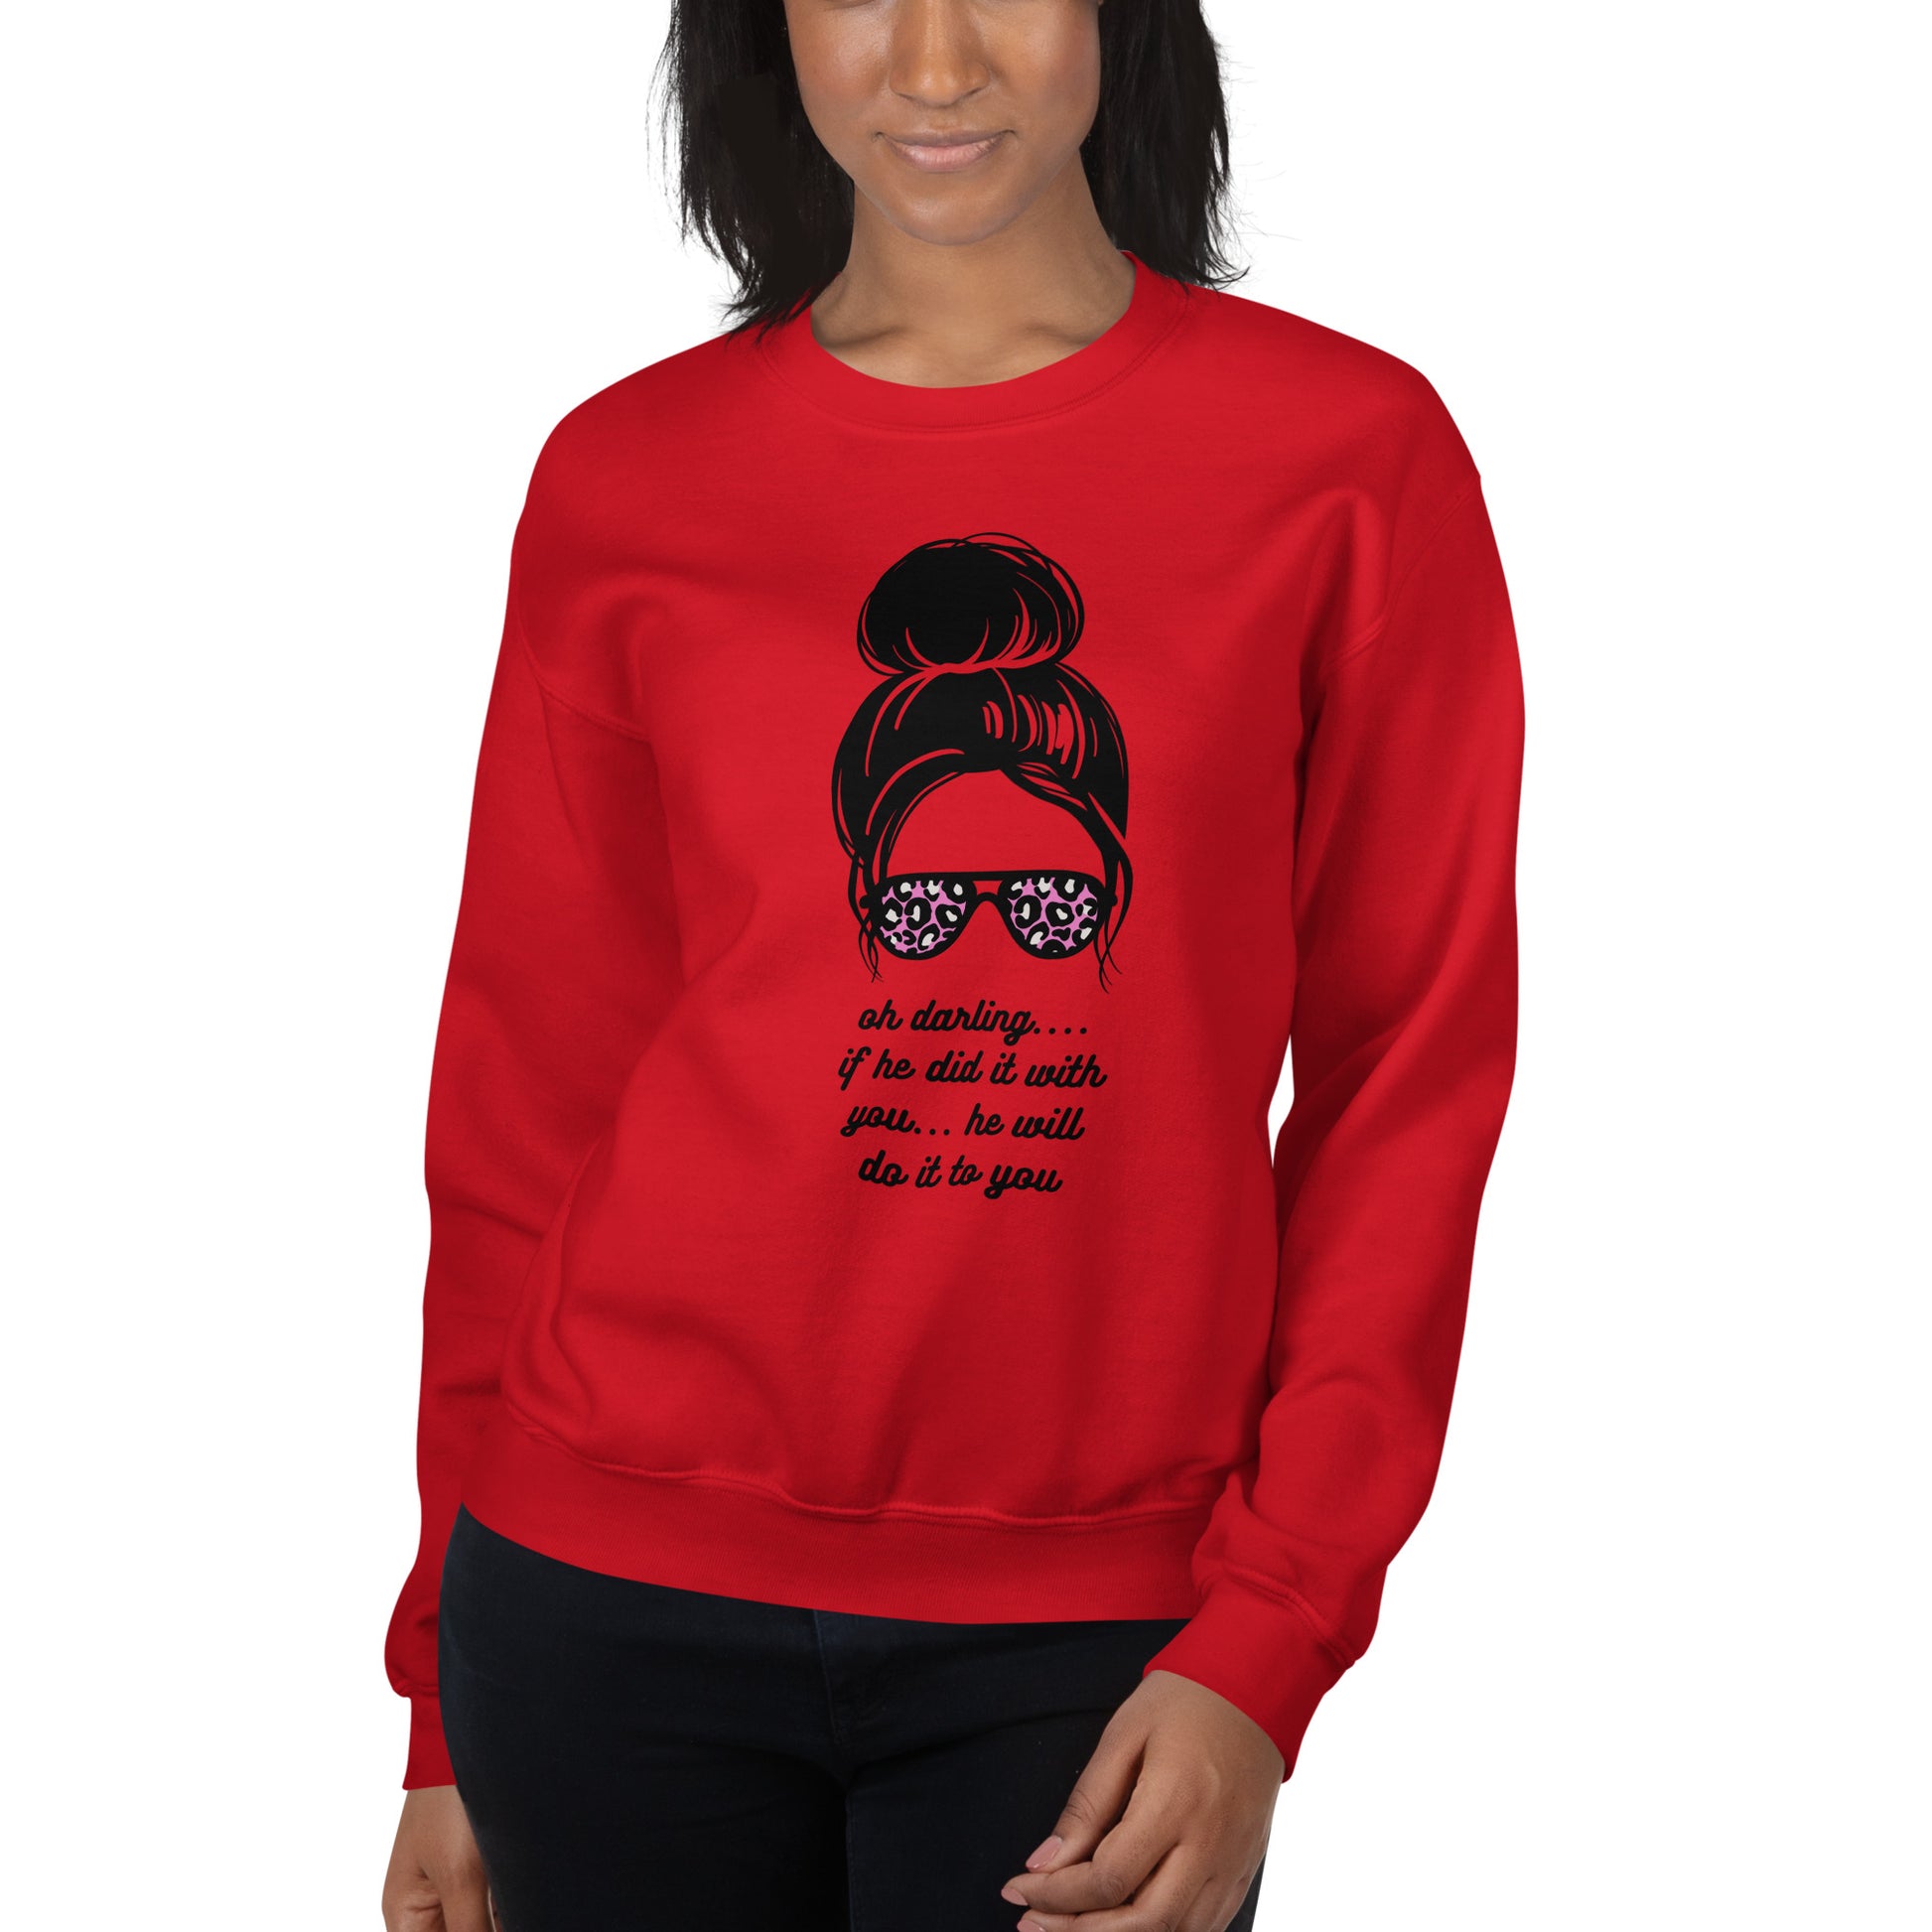 Unisex Sweatshirt - Oh Darling - If He Did it With You He'll Do It To You Sweatshirt Stylin' Spirit Red S 